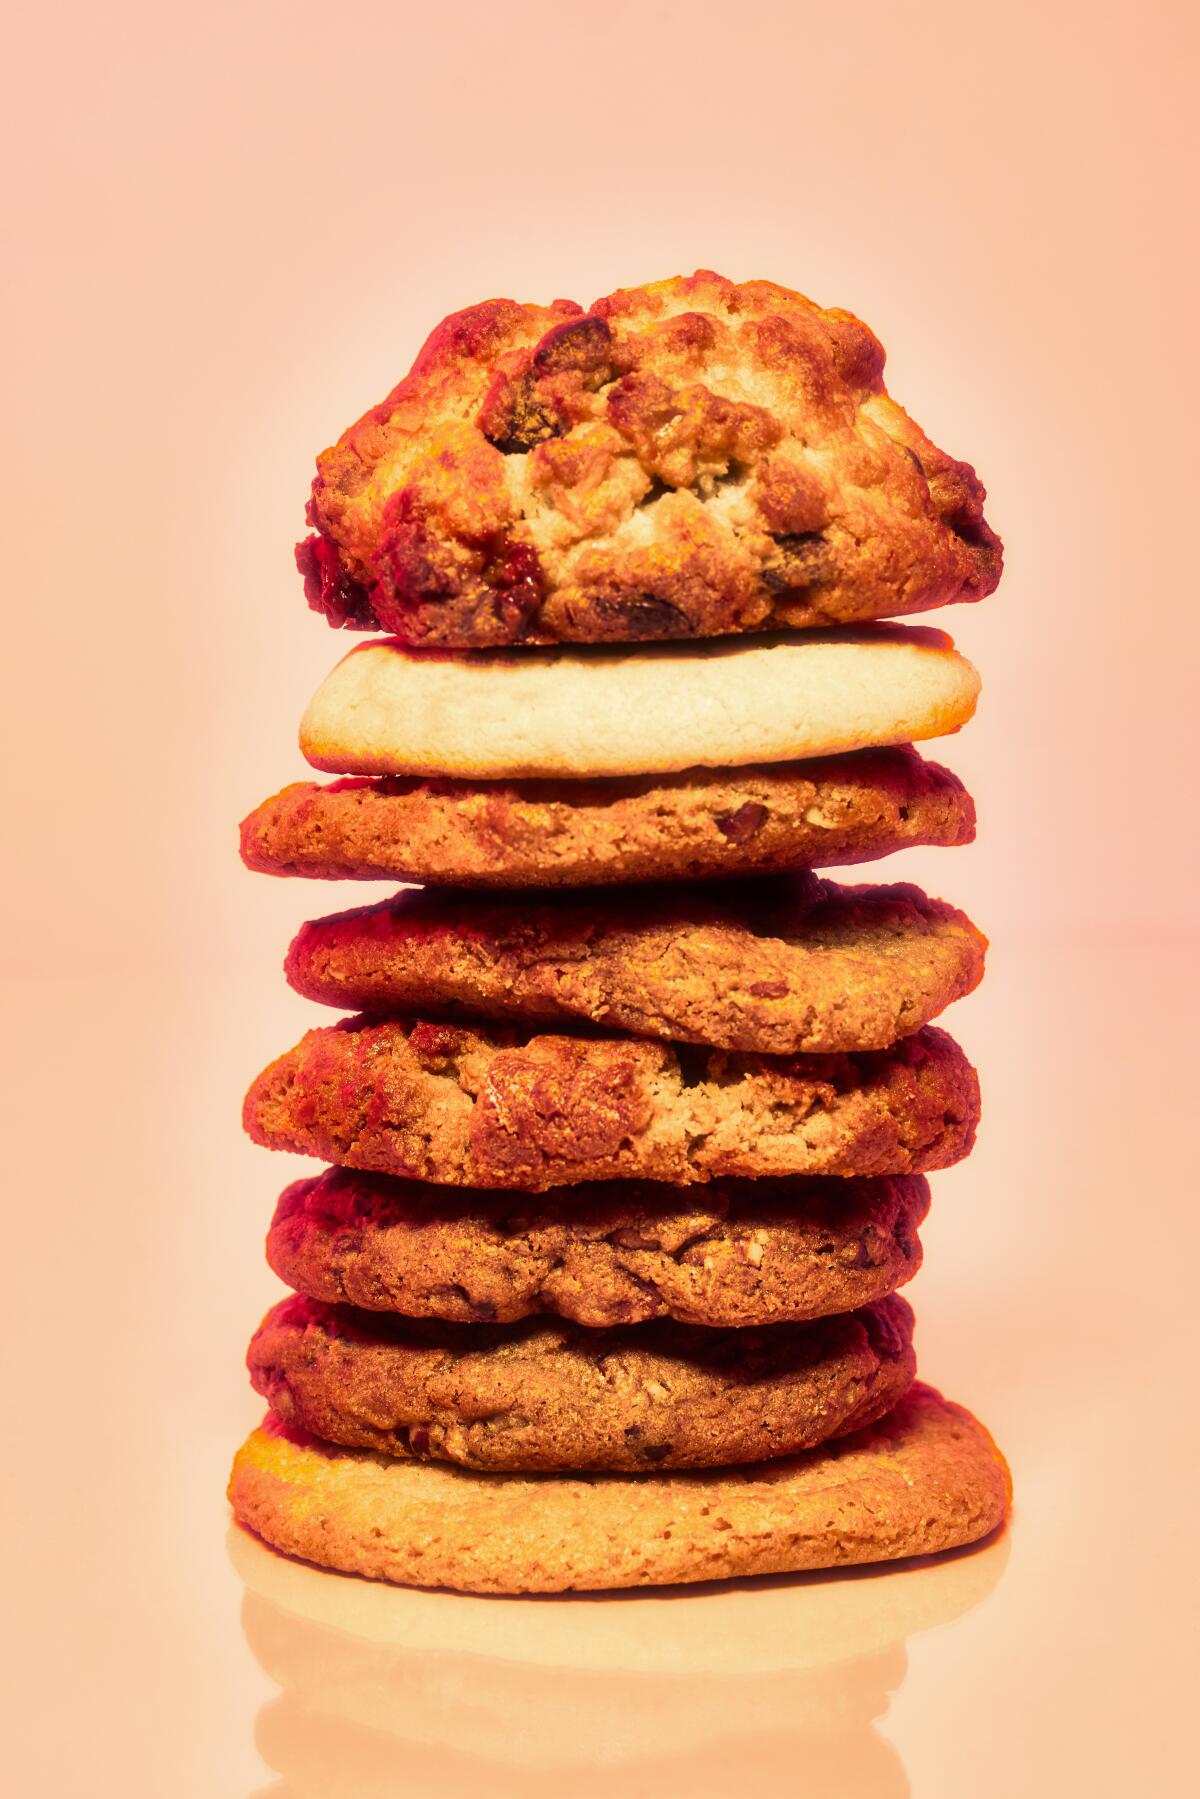 Various cookies photographed for the LA Times' "24 of the best cookies in L.A. to crush your sweet tooth."